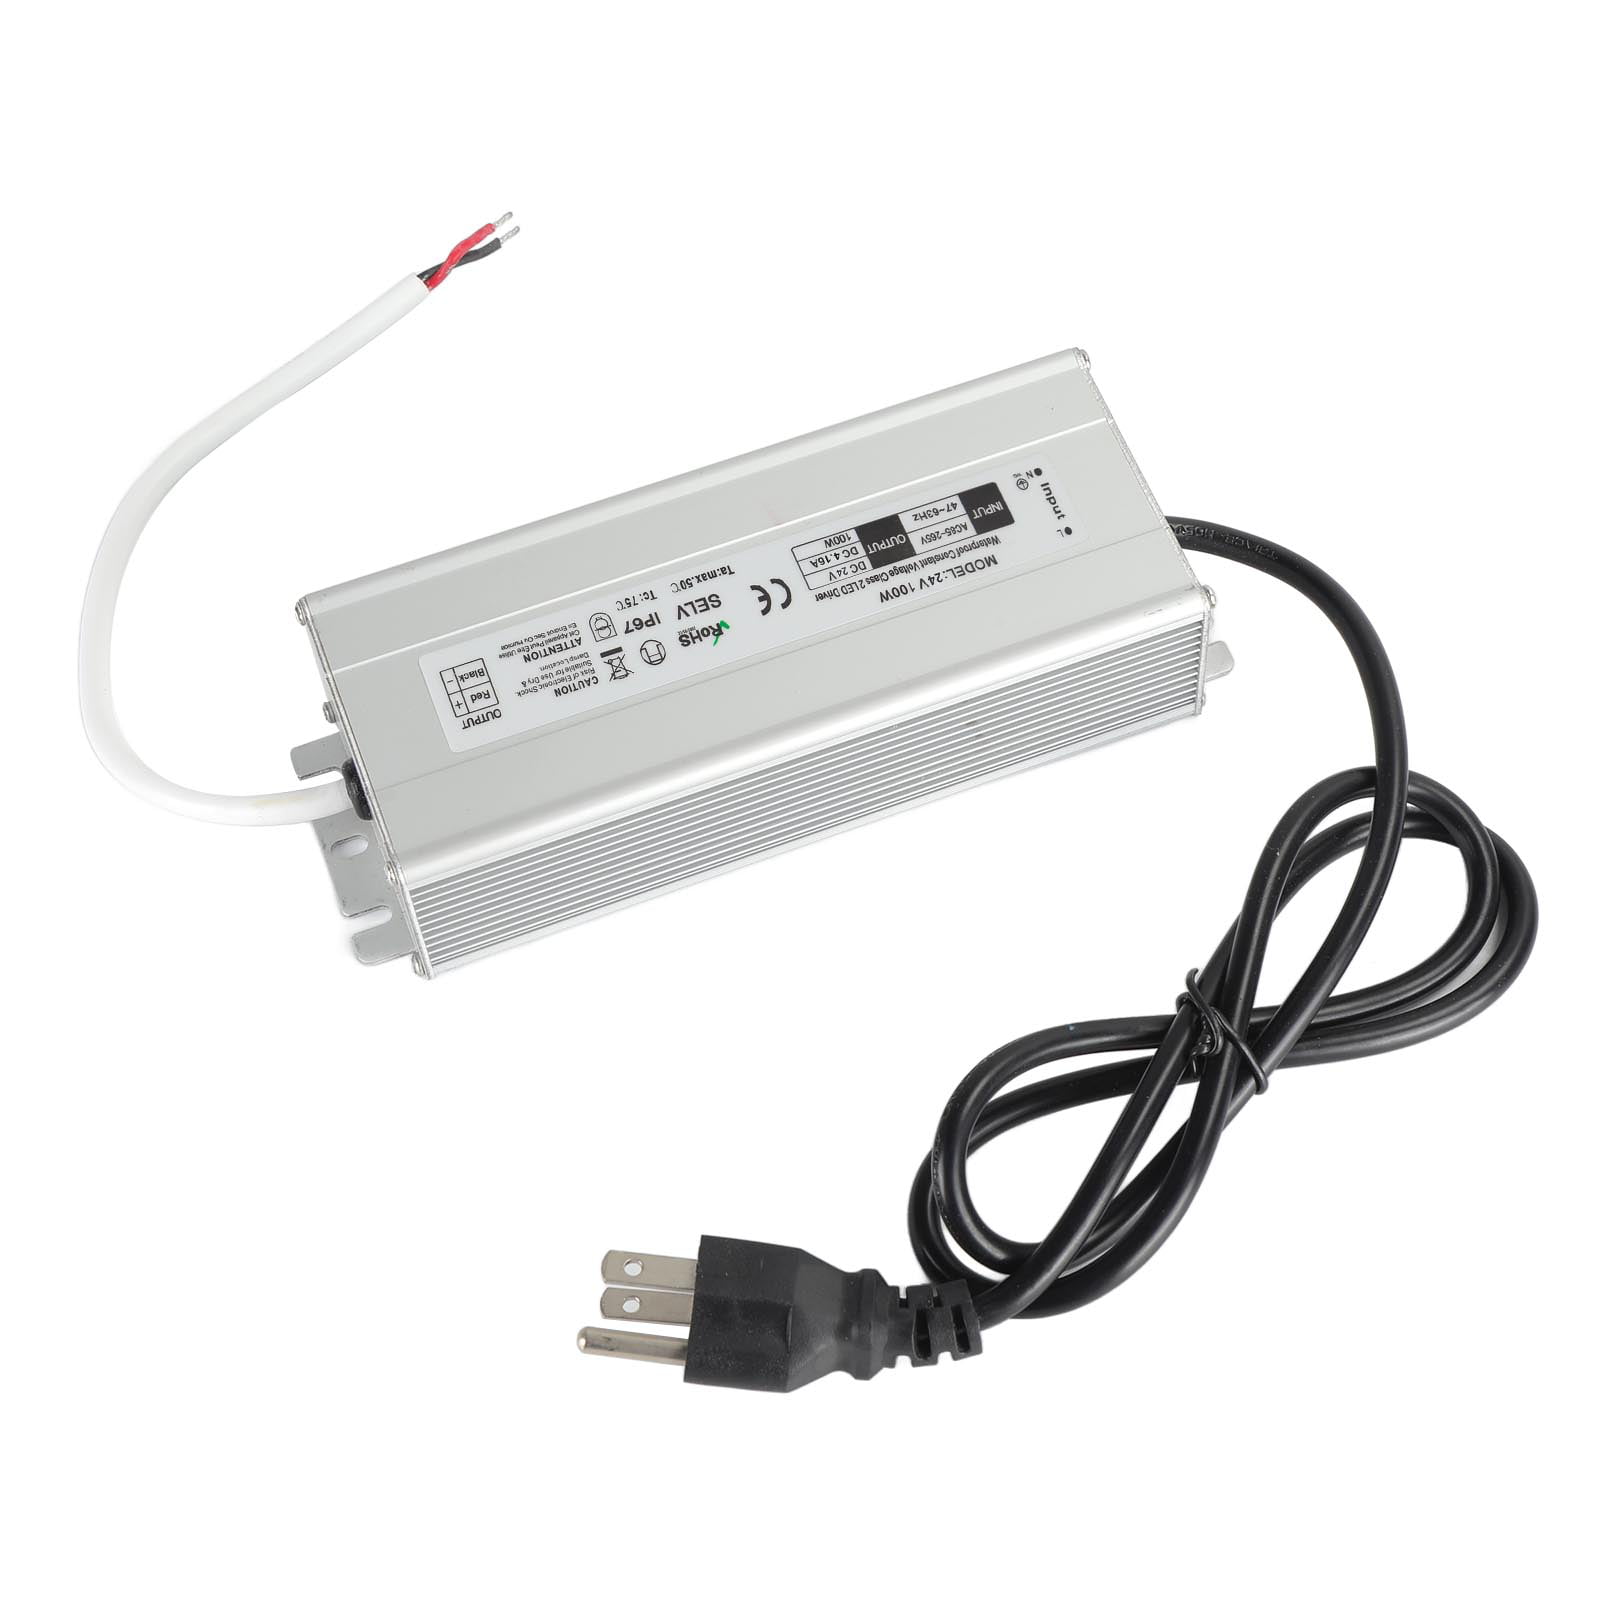 LED Driving POWER SUPPLY 4.16A Fish tank 24V 100W XP POWER Battery FOR 